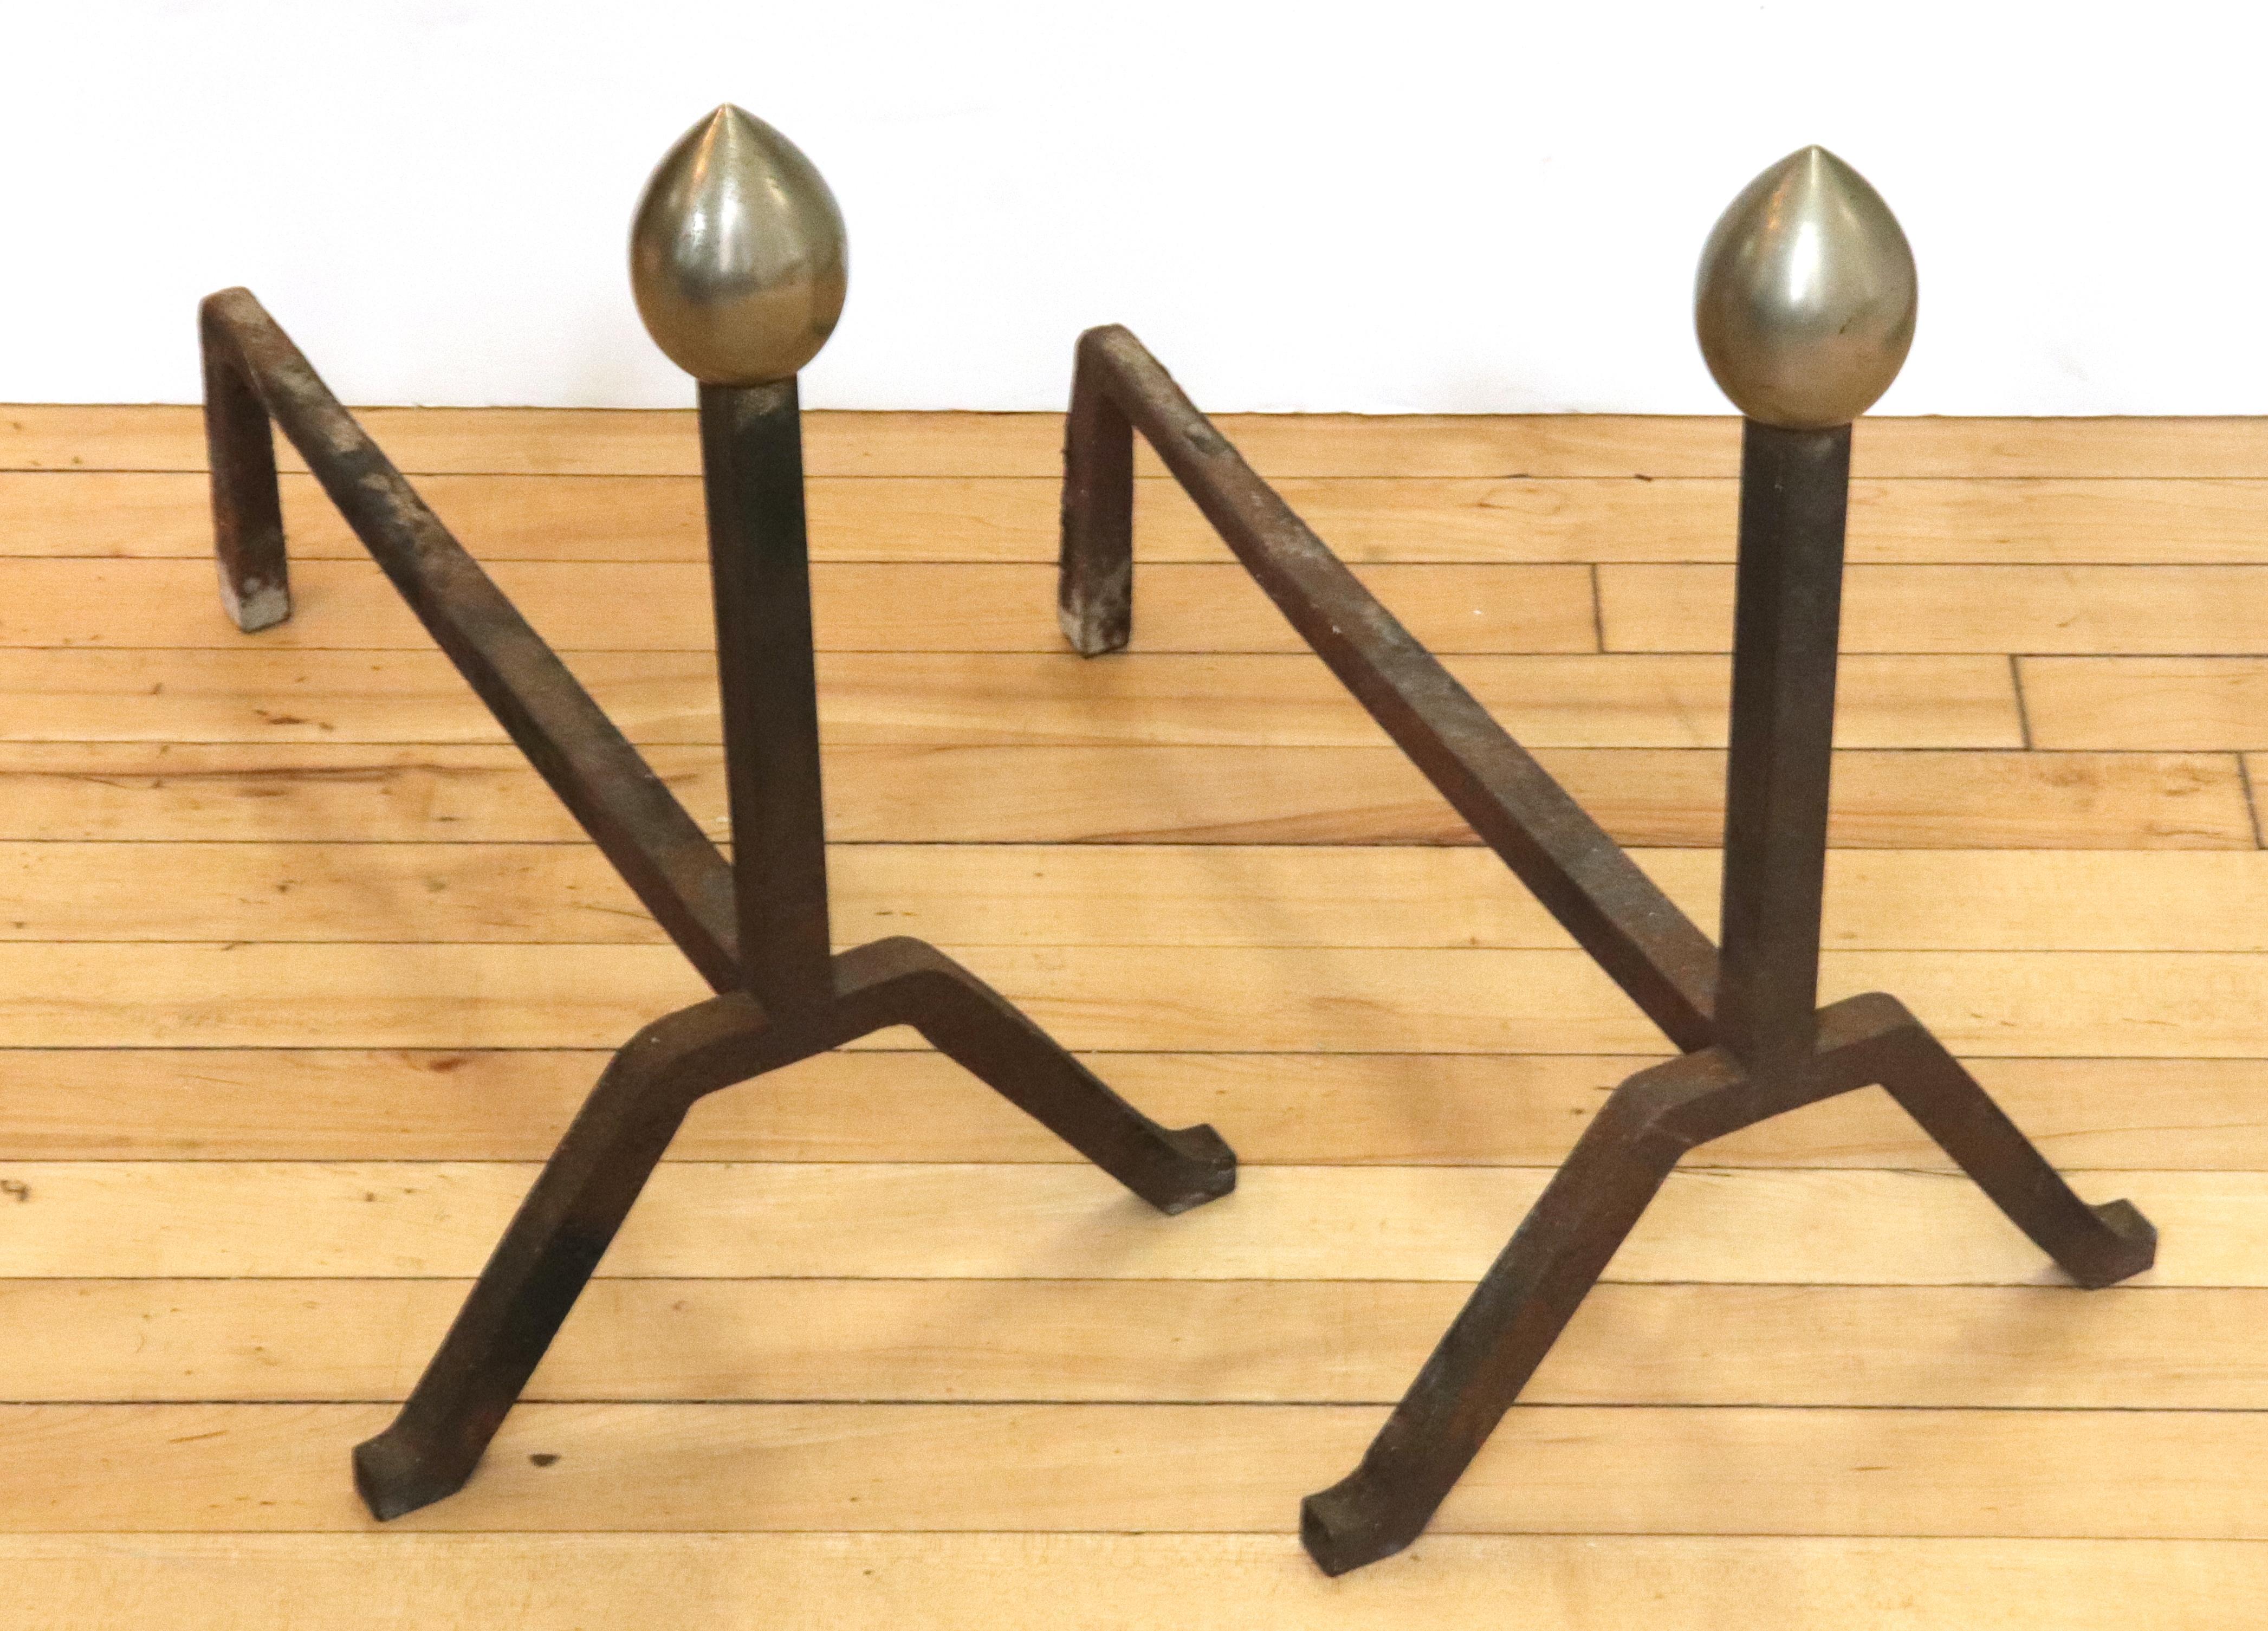 American Modernist pair of andirons made in steel and iron. The pair was made during the circa 1930s-1940s in the United States and has decorative pine cone finials. In great vintage condition with age-appropriate wear and use.